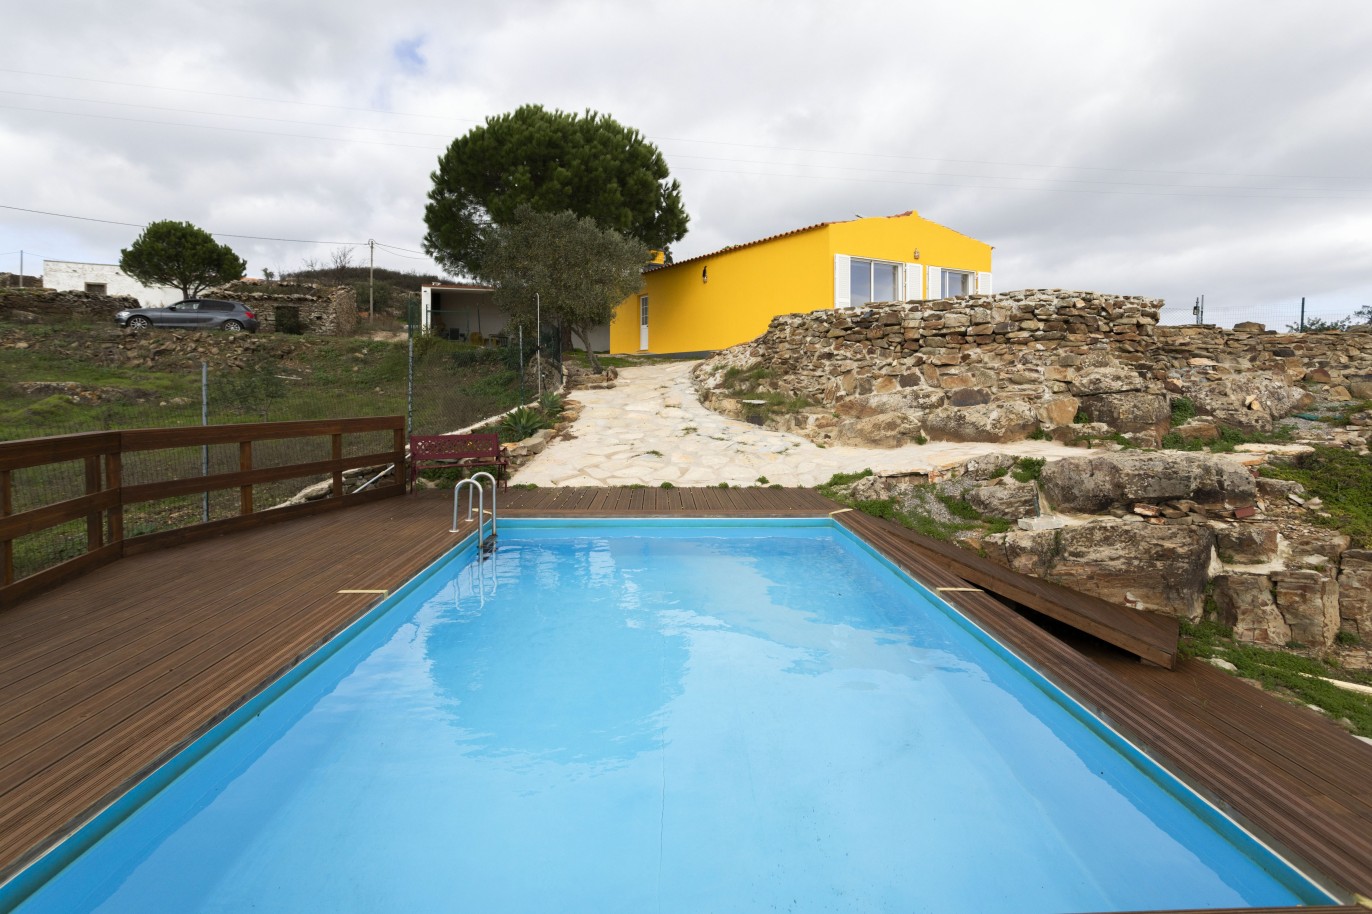 2 bedroom country house with pool, for sale in Tavira, Algarve_243296